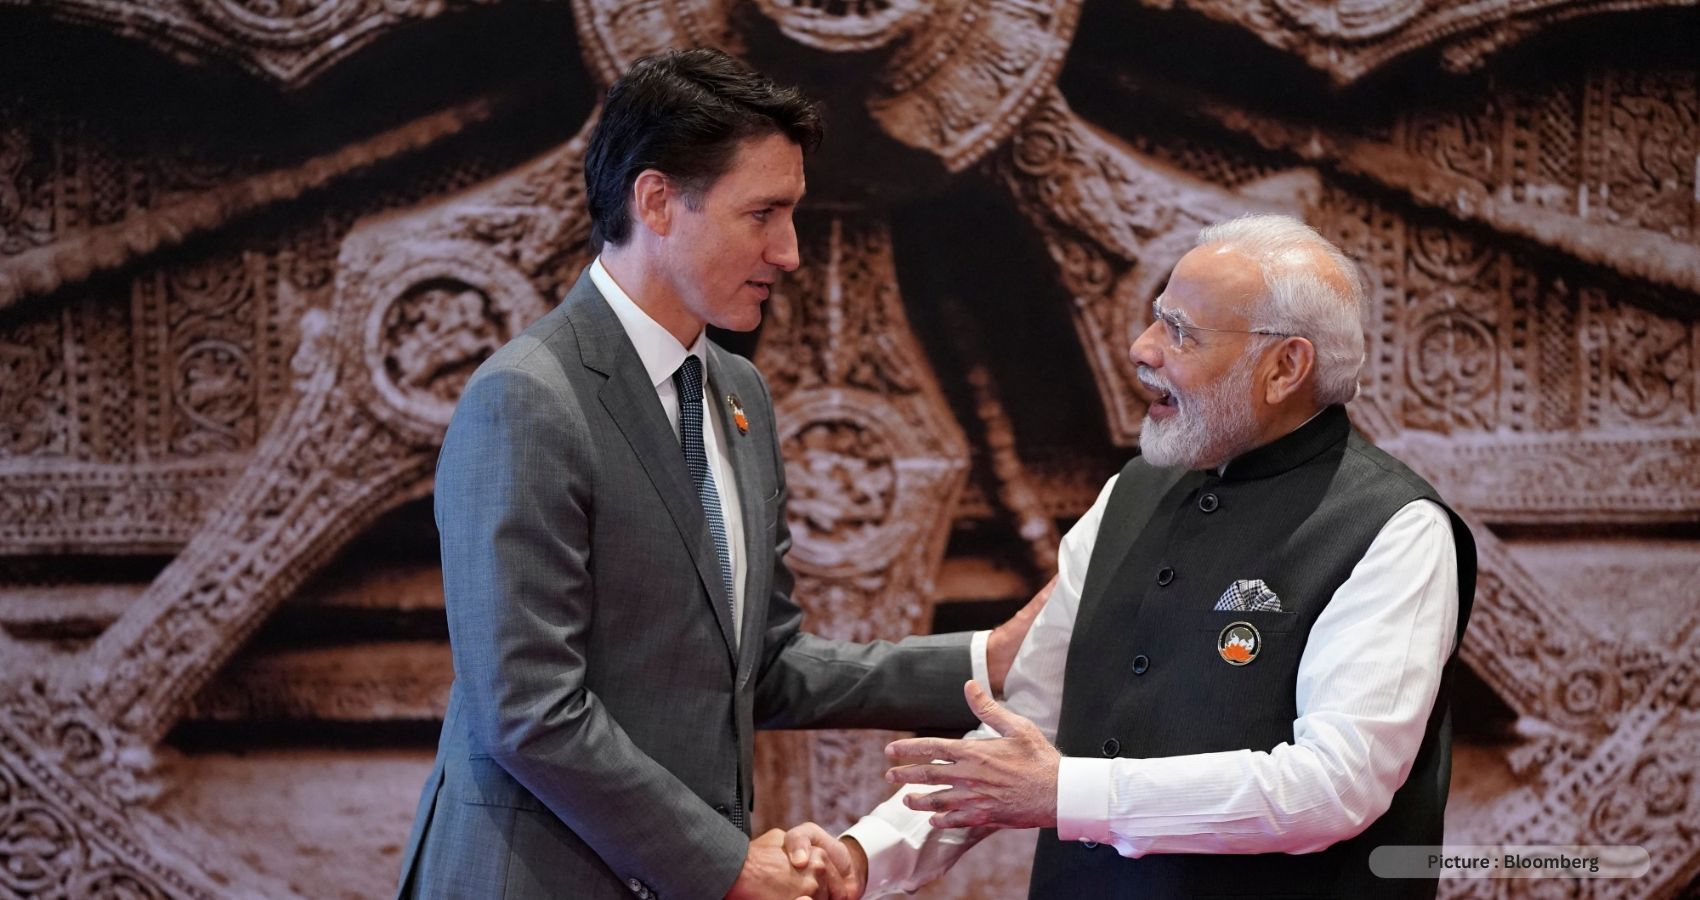 How Canada became embroiled in diplomatic spat over killing of Sikh separatist Canadian Prime Minister Justin Trudeau spoke of ‘credible allegations’ of Indian involvement in a Sikh leader’s death.